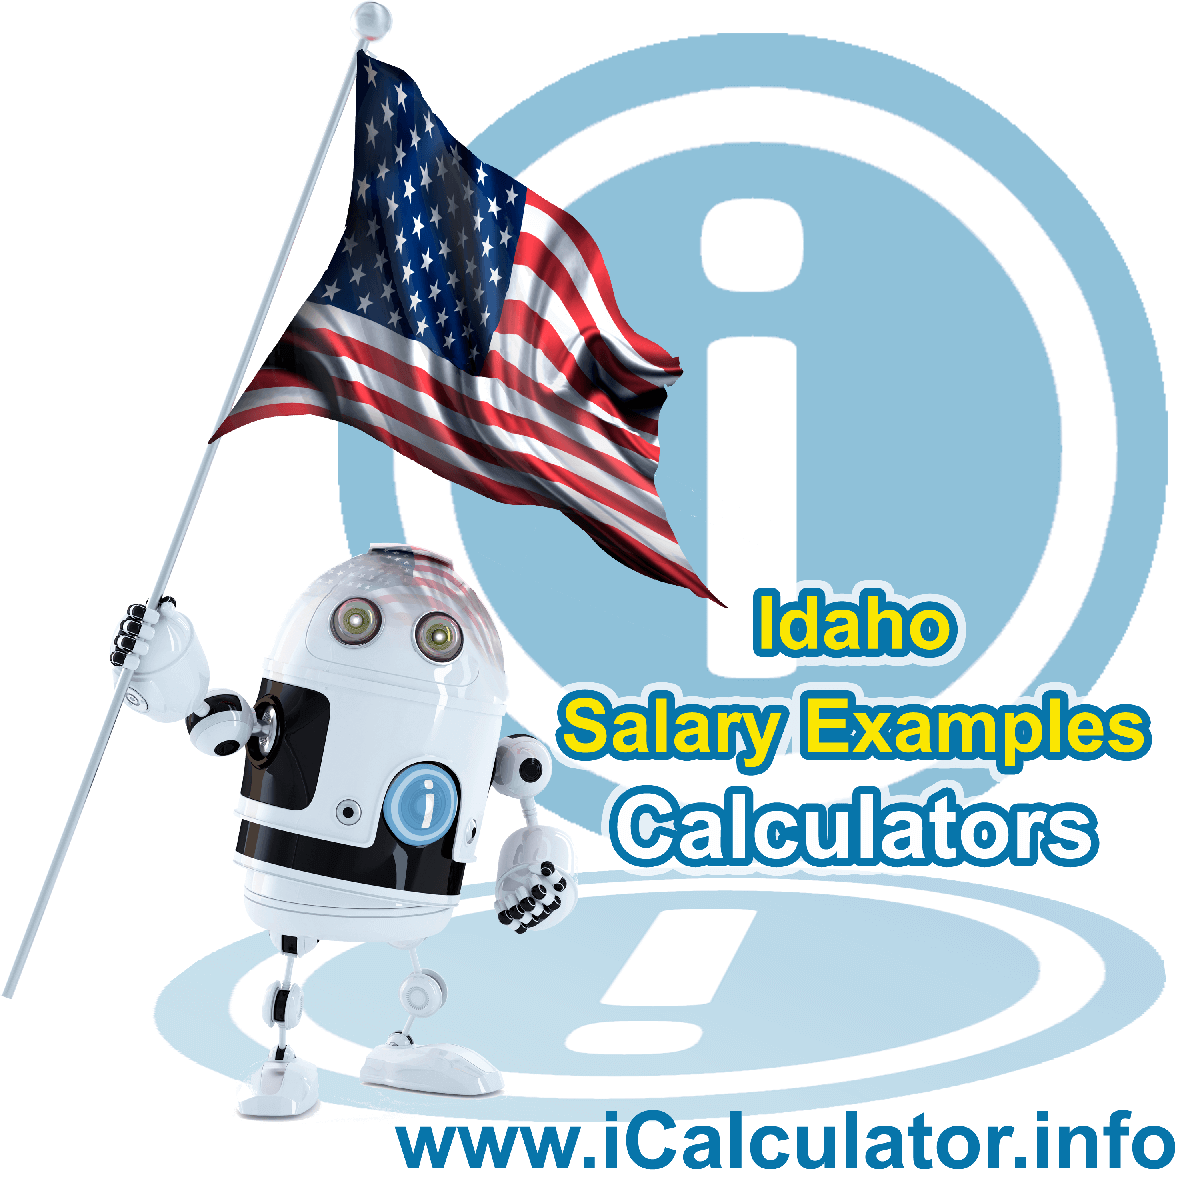 Idaho Salary Example for $160,000.00 in 2022 | iCalculator™ | $160,000.00 salary example for employee and employer paying Idaho State tincome taxes. Detailed salary after tax calculation including Idaho State Tax, Federal State Tax, Medicare Deductions, Social Security, Capital Gains and other income tax and salary deductions complete with supporting Idaho state tax tables 